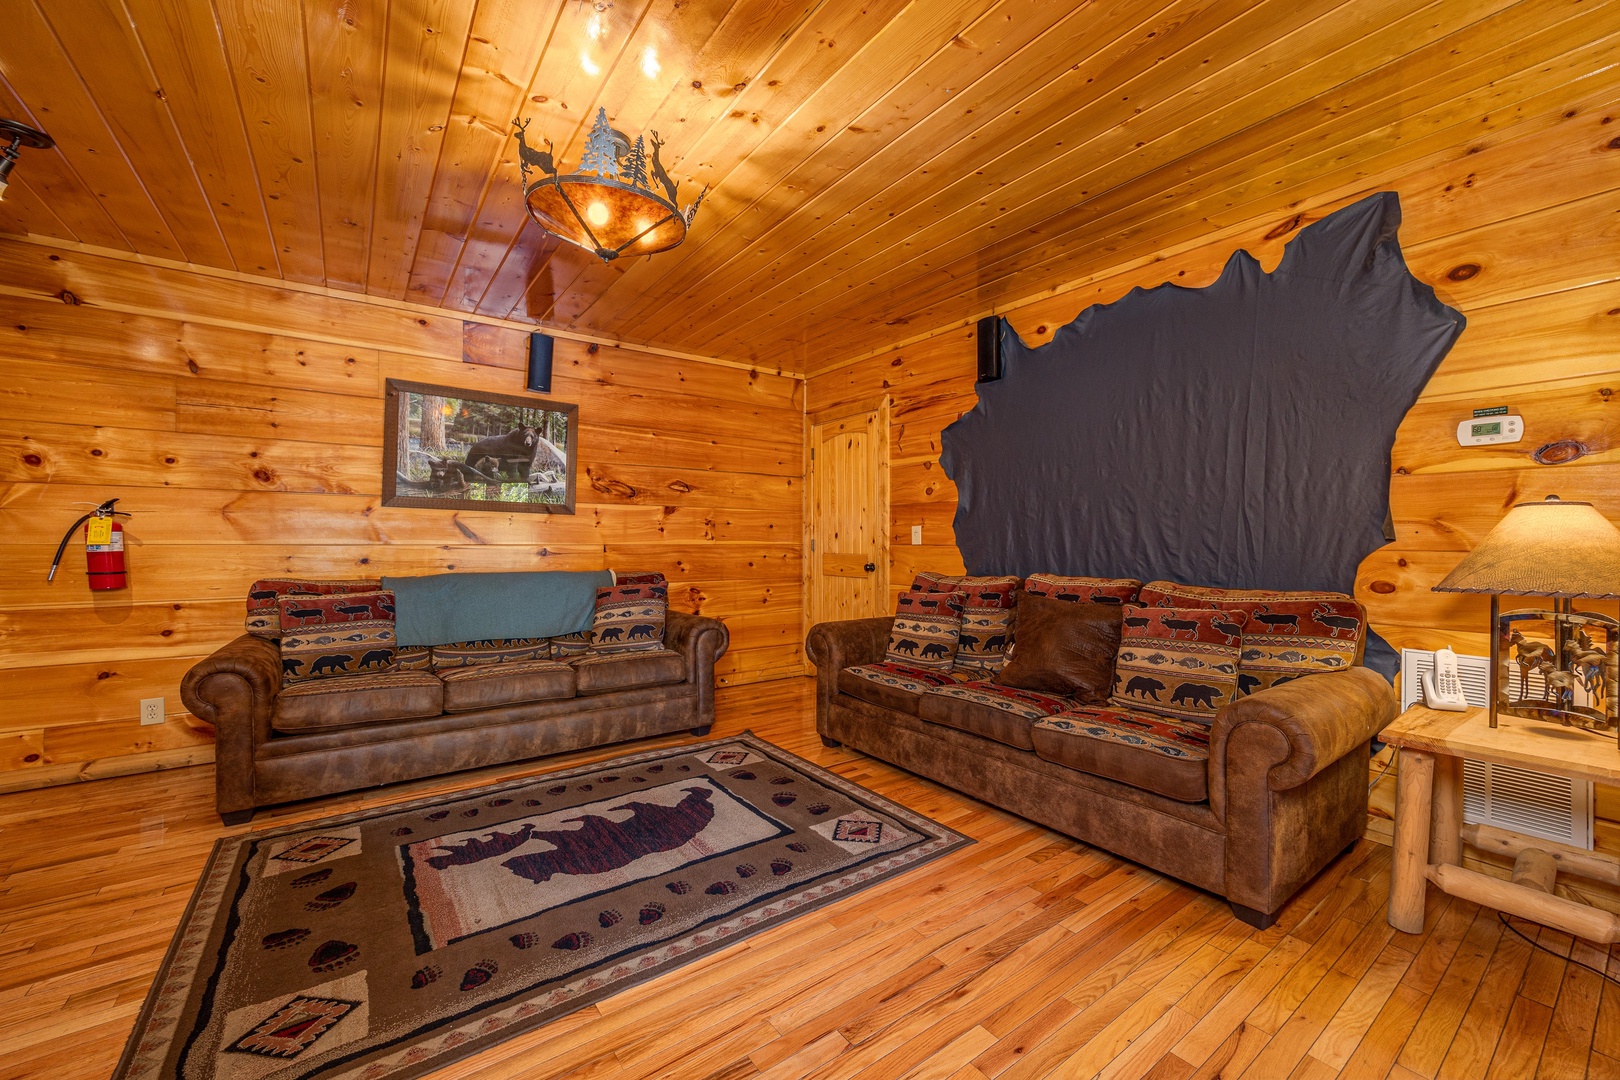 Den seating at The Great Outdoors, a 3 bedroom cabin rental located in Pigeon Forge